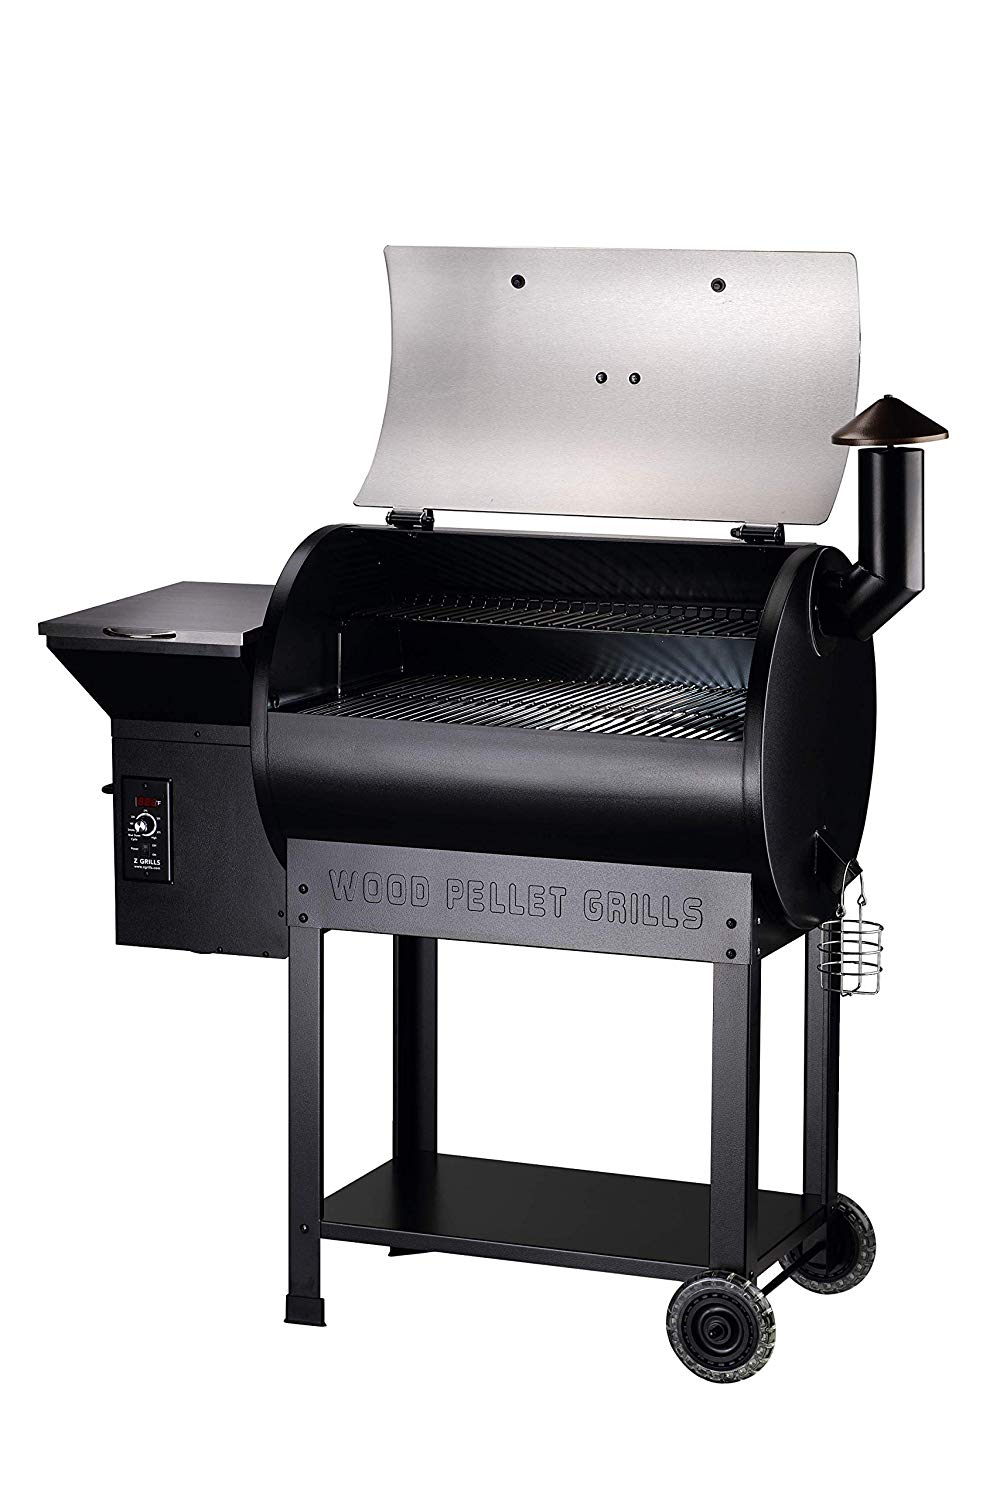 Z GRILLS ZPG-7002E 2019 New Model Wood Pellet Smoker, 8 in 1 BBQ Grill Auto Temperature Control, 700 sq inch Cooking Area, Silver Cover Included - image 2 of 7